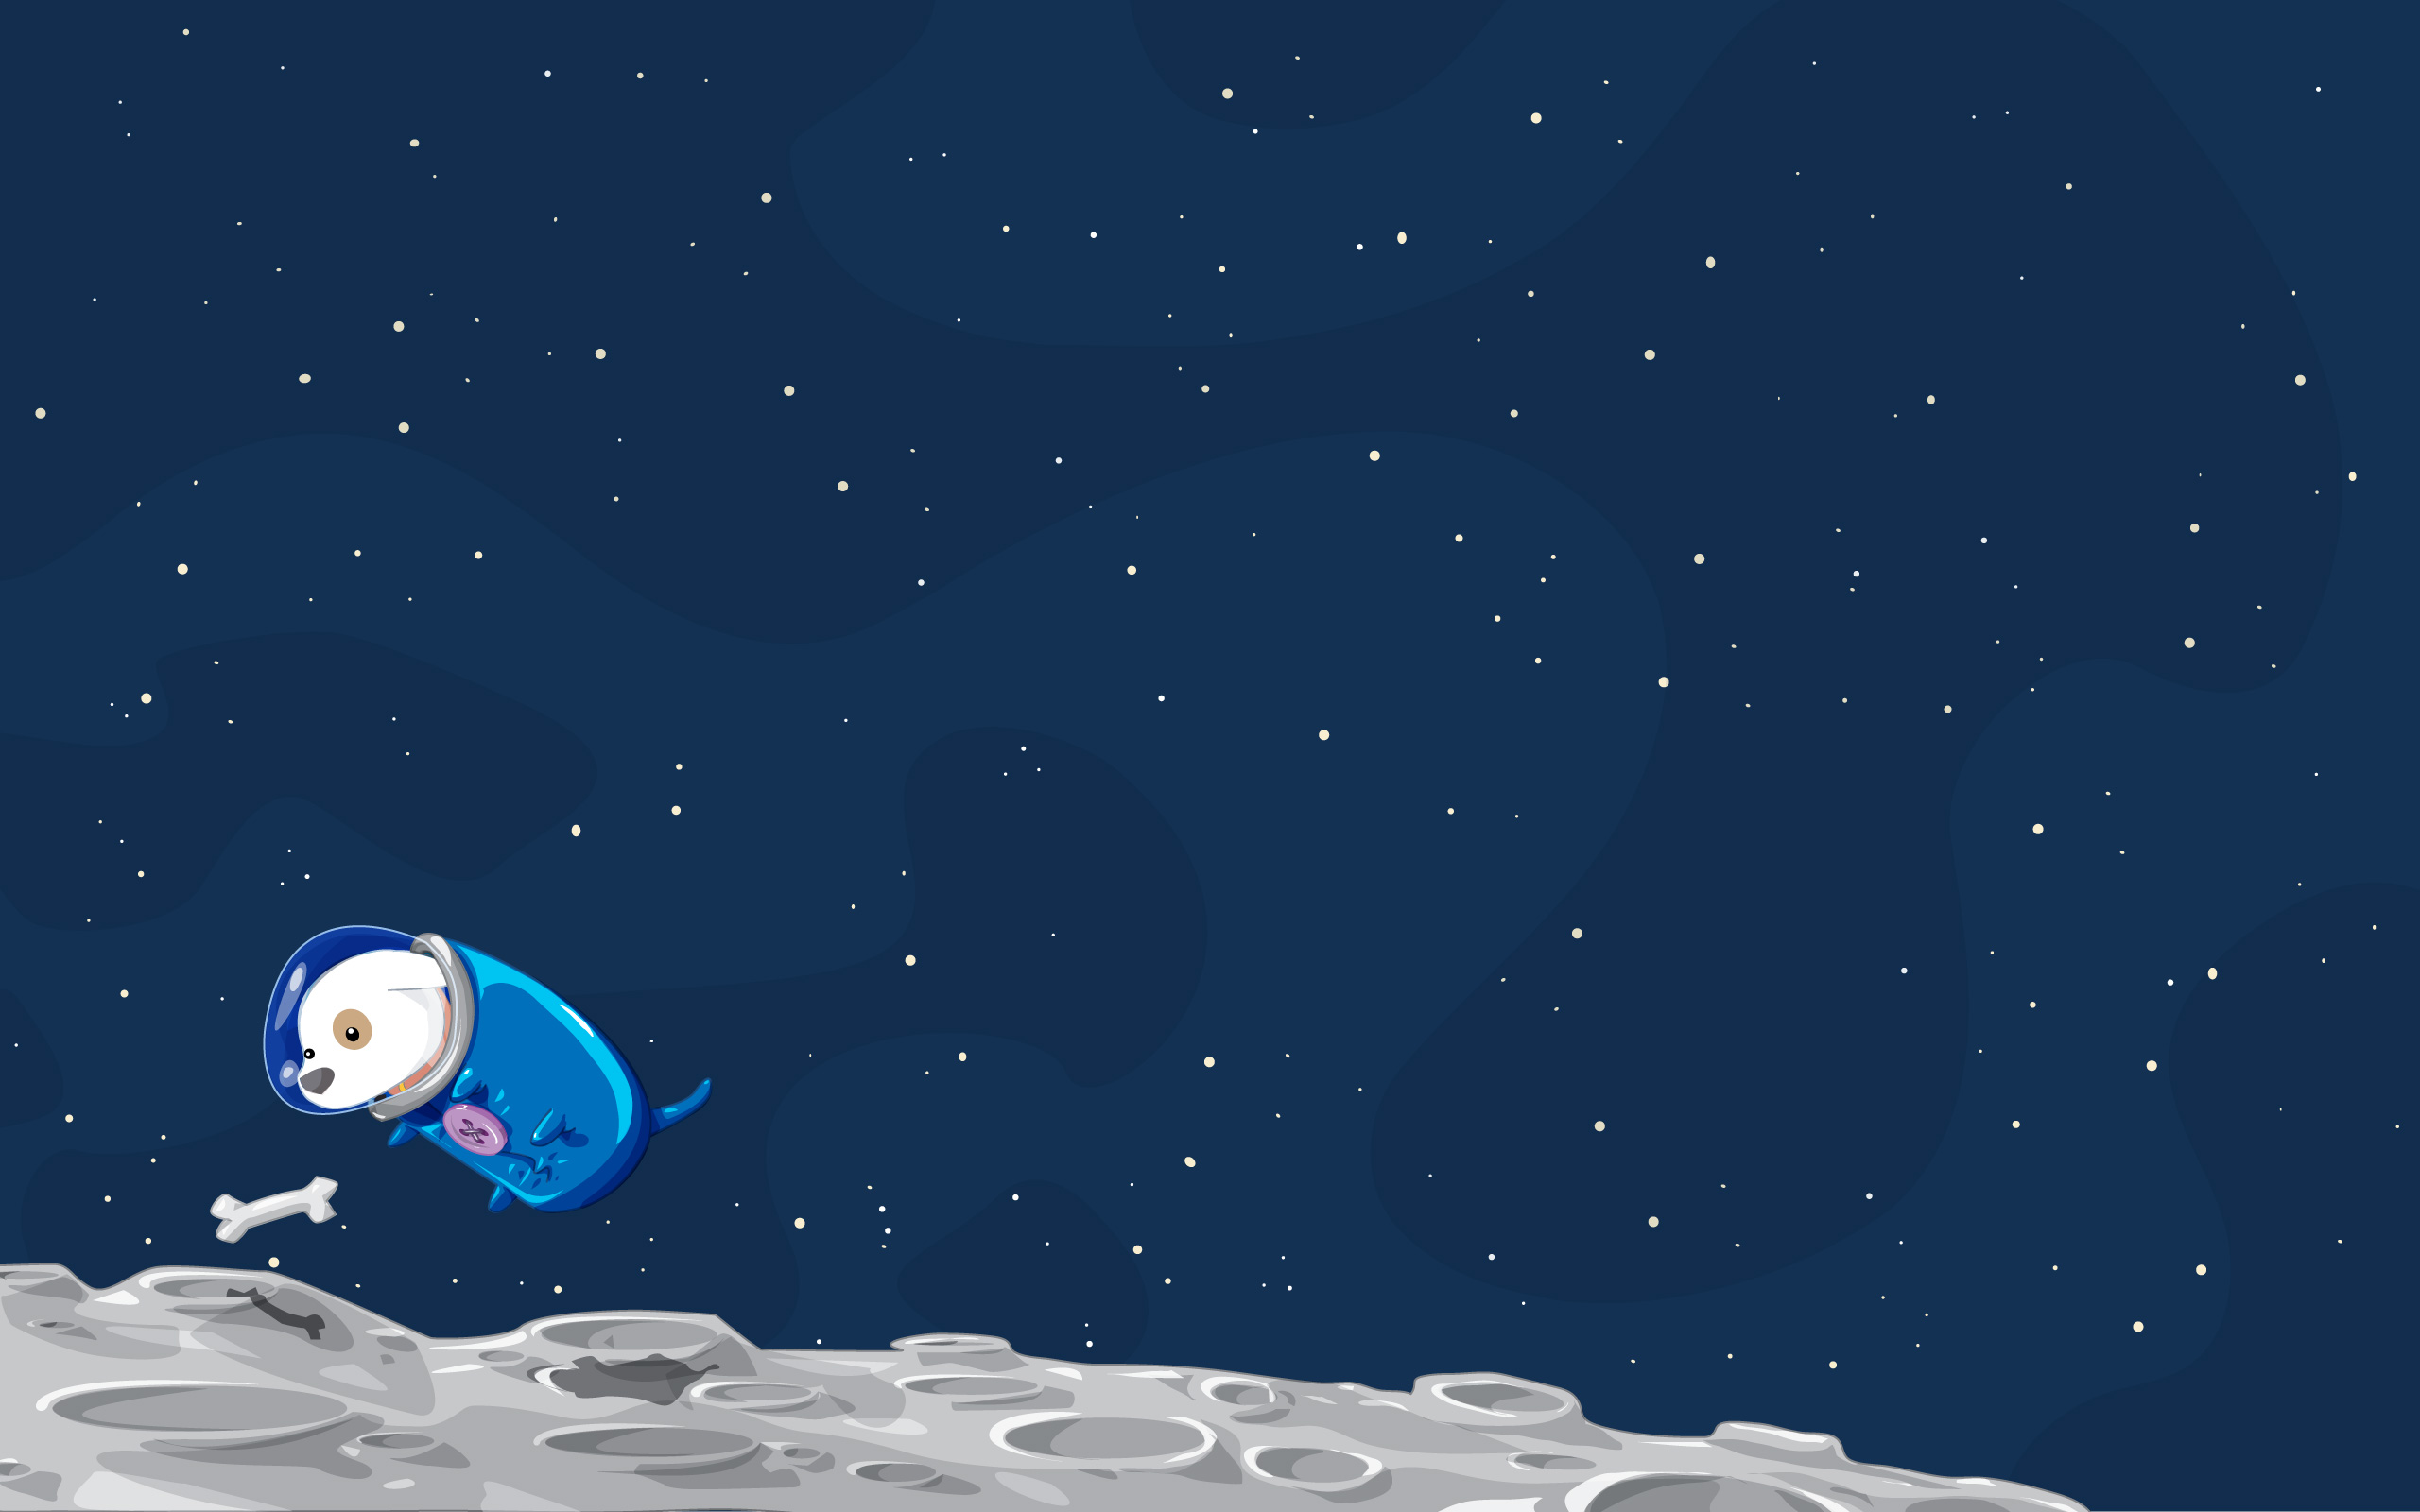 outer space, Moon, vectors, dogs, puppies, cartoonish, space suits Wallpaper / WallpaperJam.com